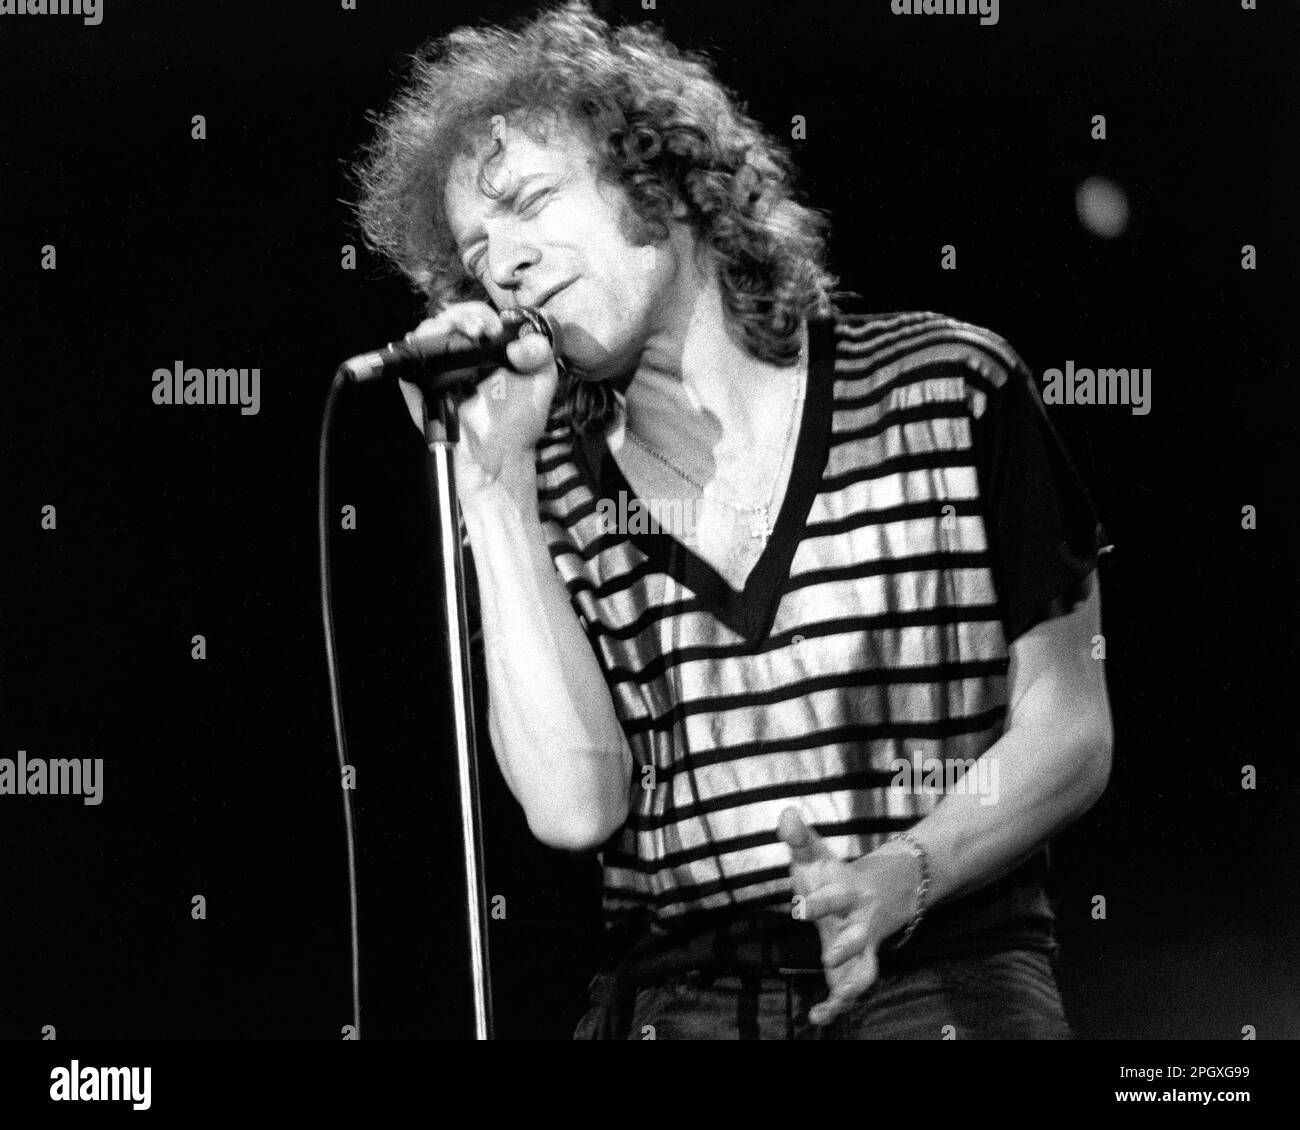 Lou Gramm of Foreigner, Providence, RI, Civic Center, October 29, 1979. Stock Photo